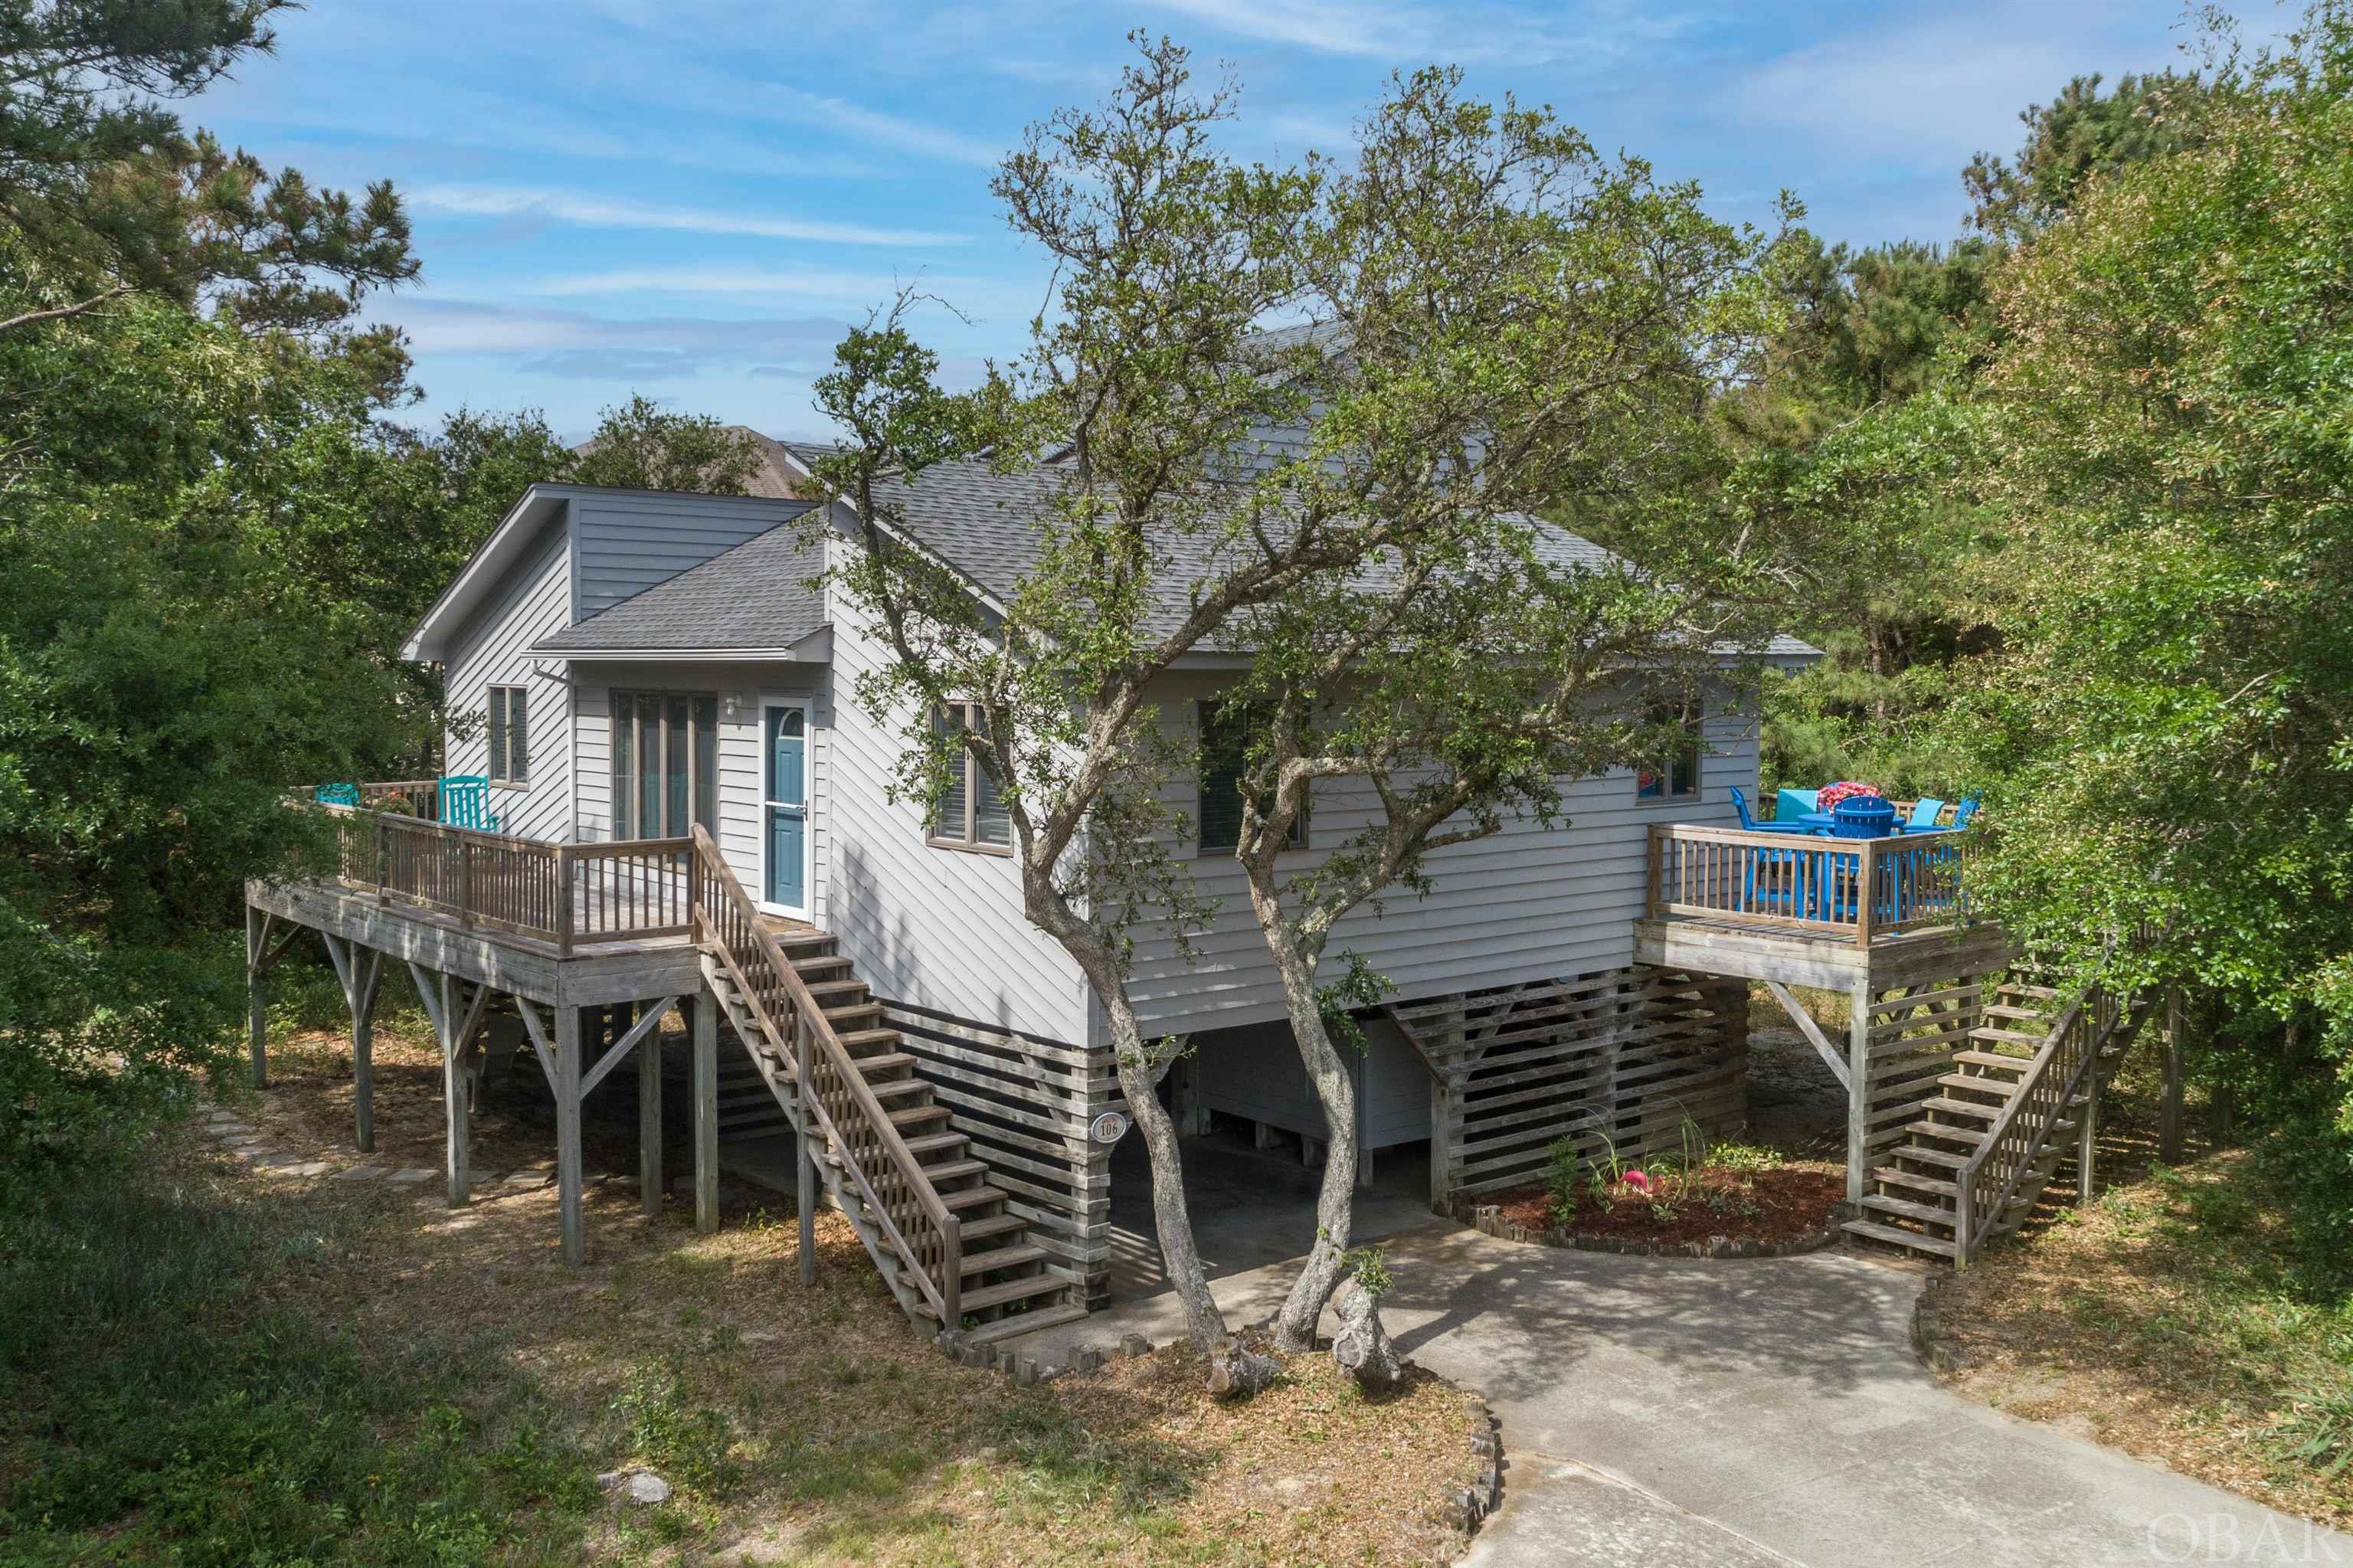 This Chicahauk home is just a 5 minute walk to the beach and located on a private 26,872 square foot lot in an X flood zone. The interior is freshly painted and new flooring to compliment the natural light pouring in the large windows. There is a screened porch, 2 decks perfect for outdoor entertaining. Under the house you will find storage for bikes, boards and beach chairs. Sellers have provided a recent survey to get you started! Chicahauk POA provides a great park with tennis courts, basketball and a baseball field. This beach house is waiting for a creative mind to transform the property into a Southern Shores oasis.